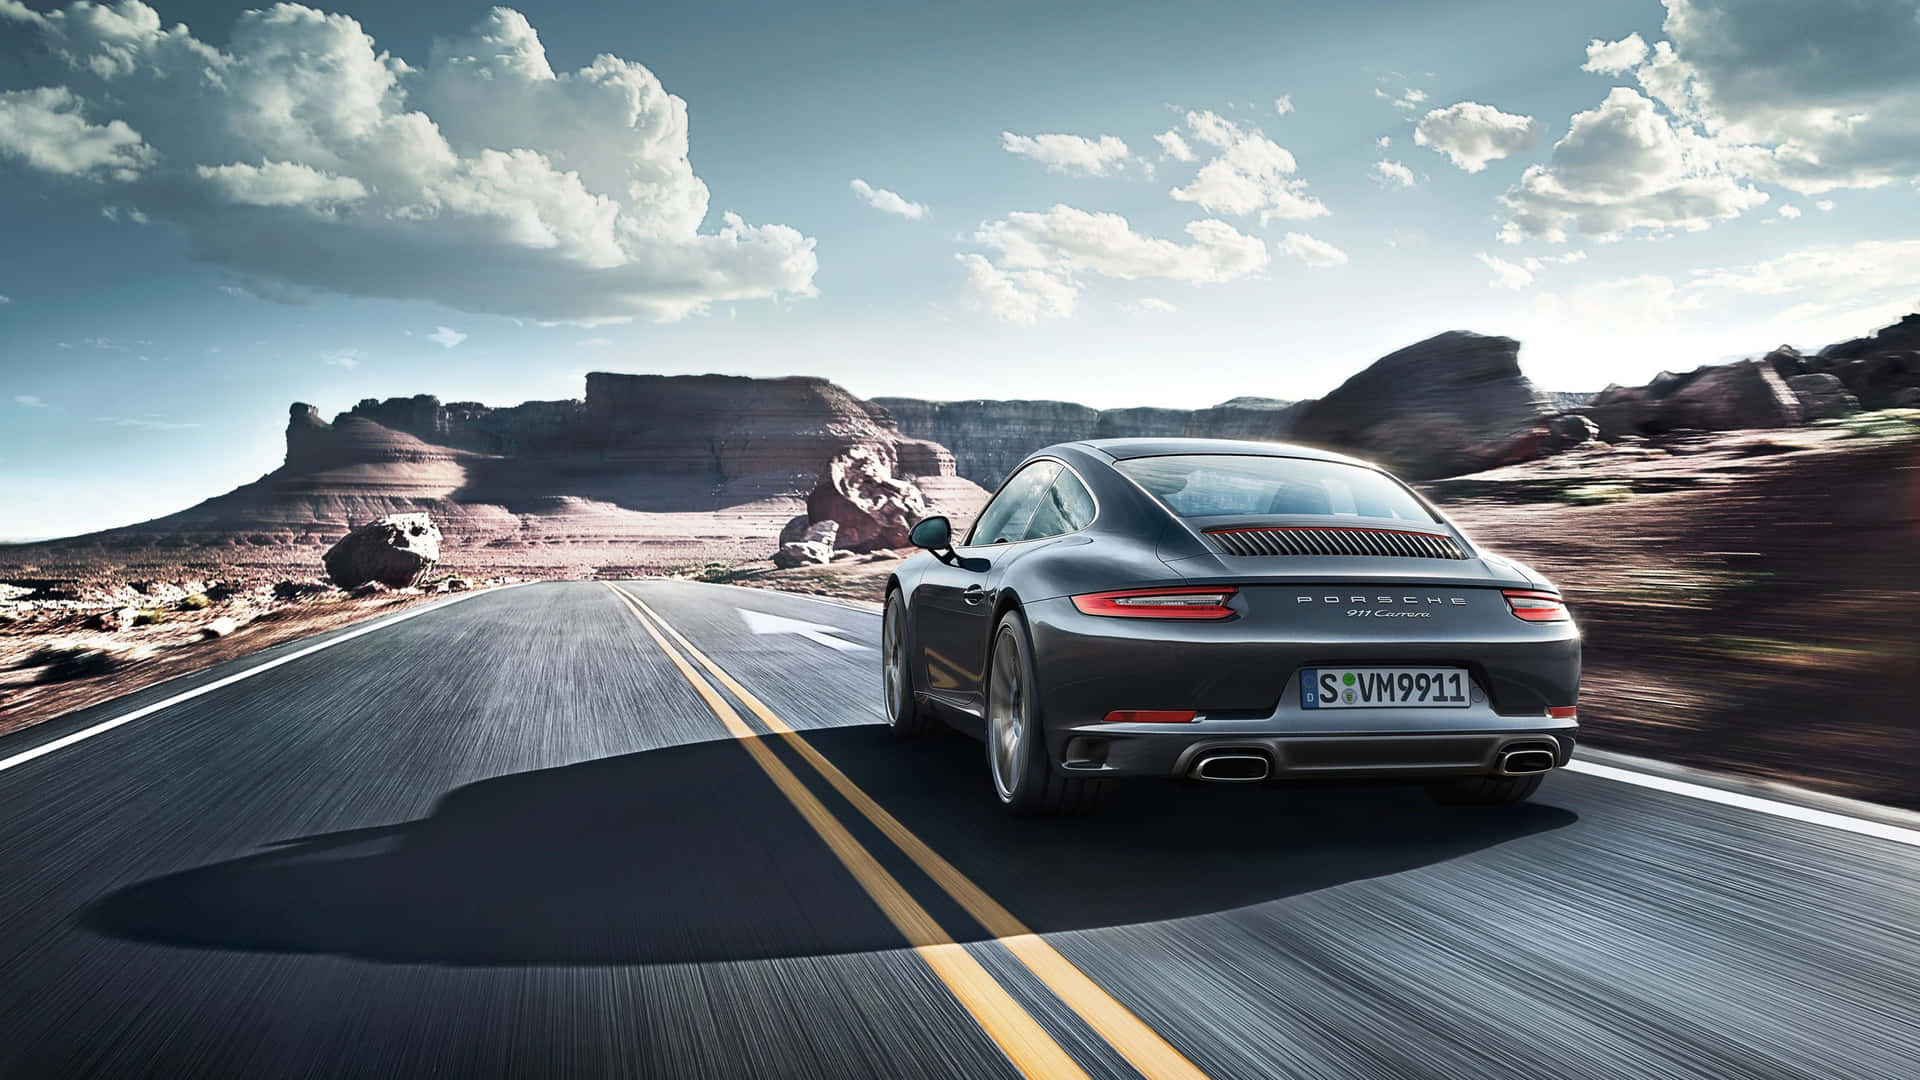 Explore The Road In A Rugged Porsche Background